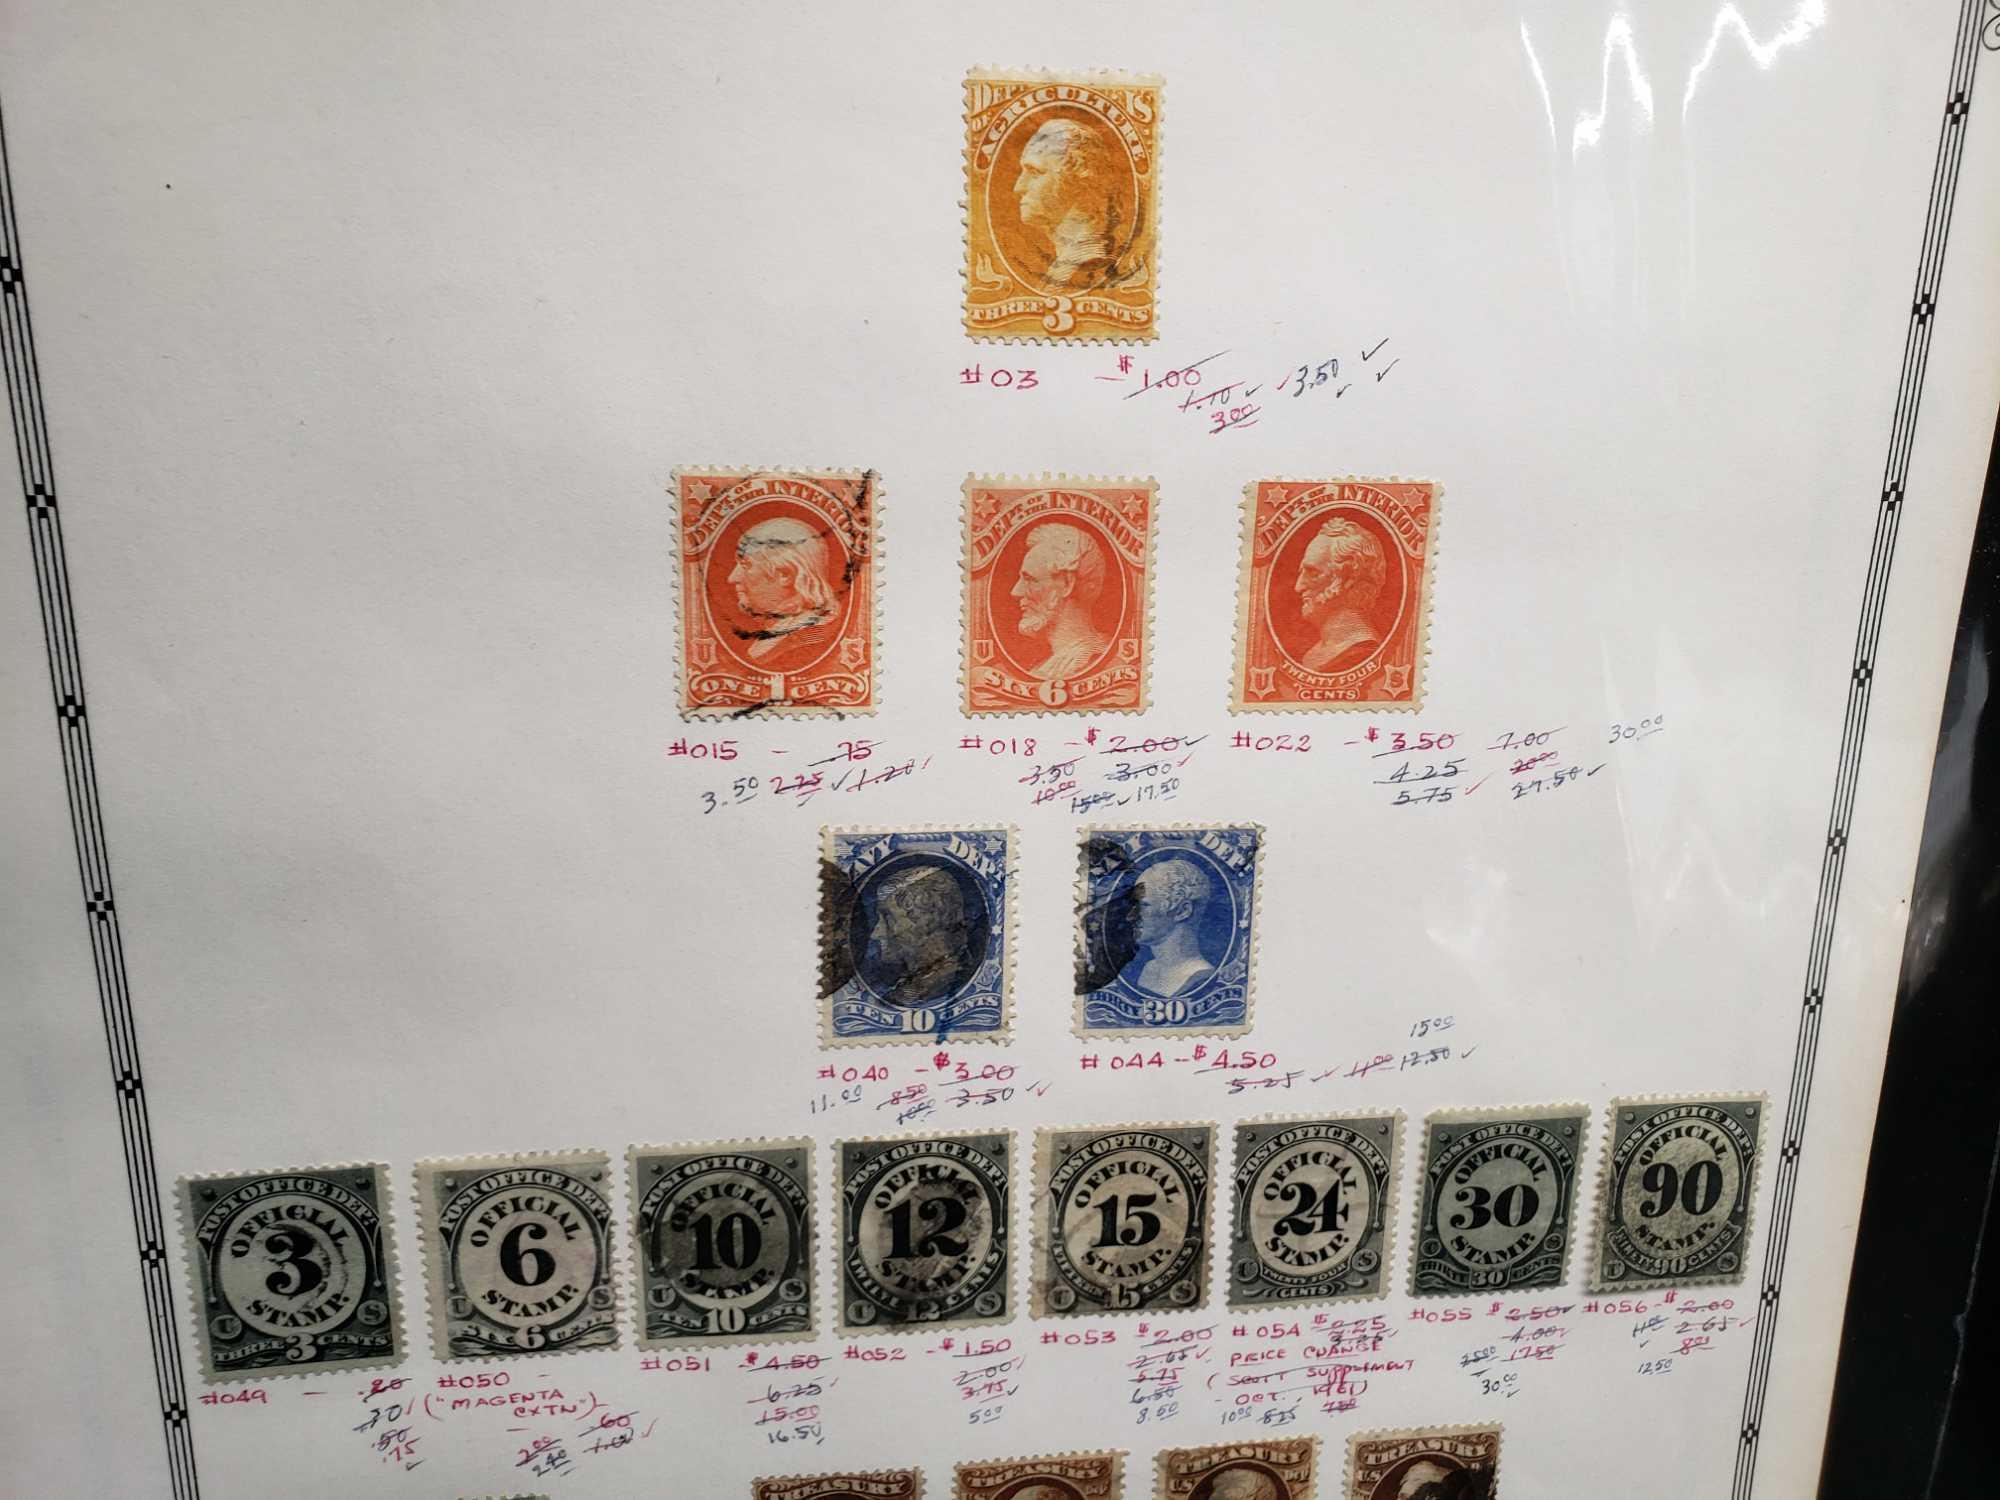 Rare United States Stamps. Dept of Interior. Treasury. And more